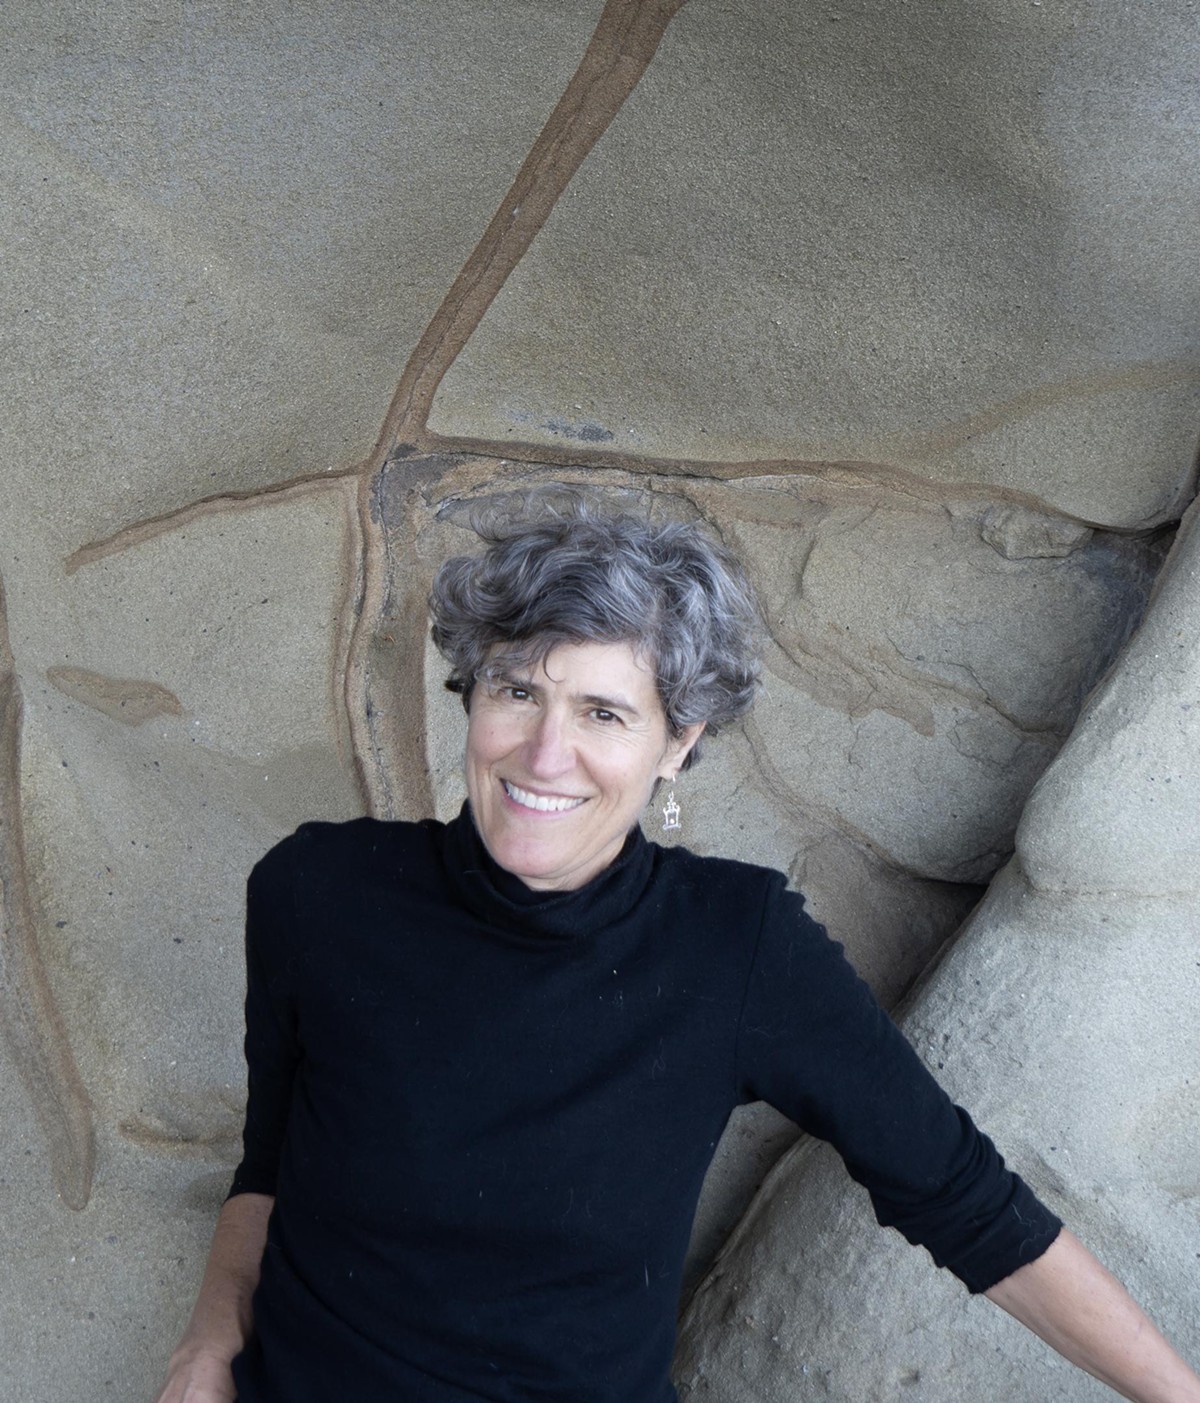 Robin McLean will join UC’s Visiting Writers Series on Thursday, March 28 at 5:30 for a fiction reading; and on Friday, March 29 at 3:30 p.m., McLean will be in conversation with her agent Stephanie Steiker.